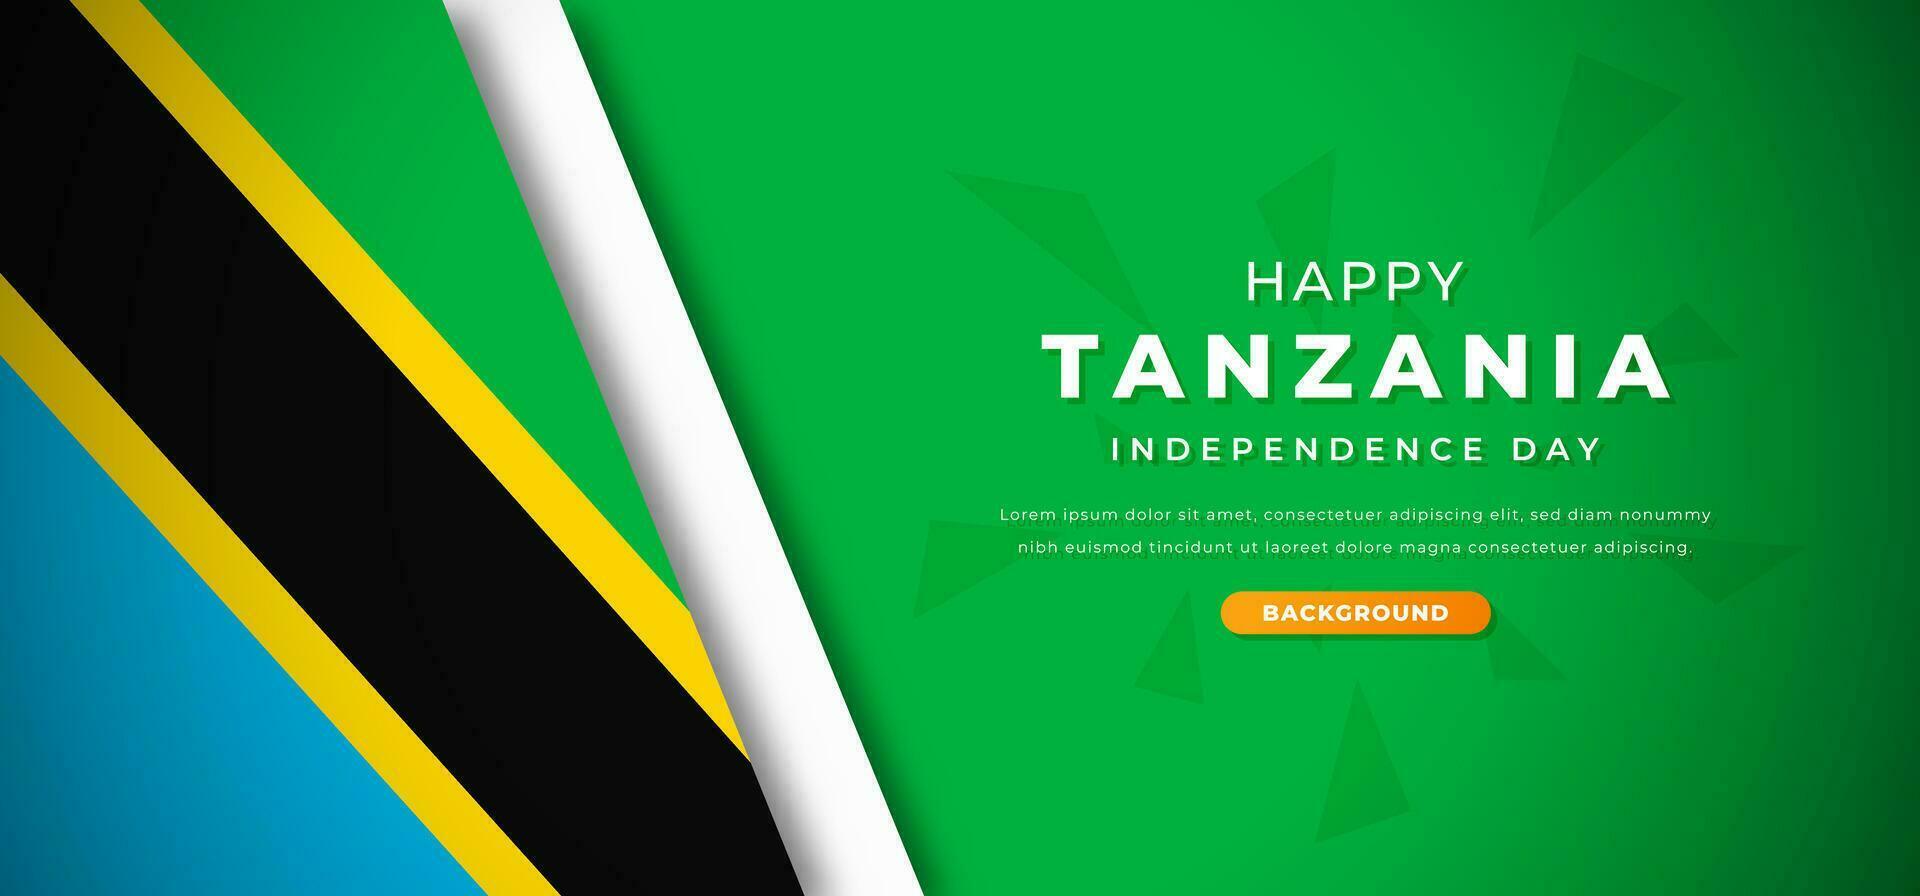 Happy Tanzania Independence Day Design Paper Cut Shapes Background Illustration for Poster, Banner, Advertising, Greeting Card vector